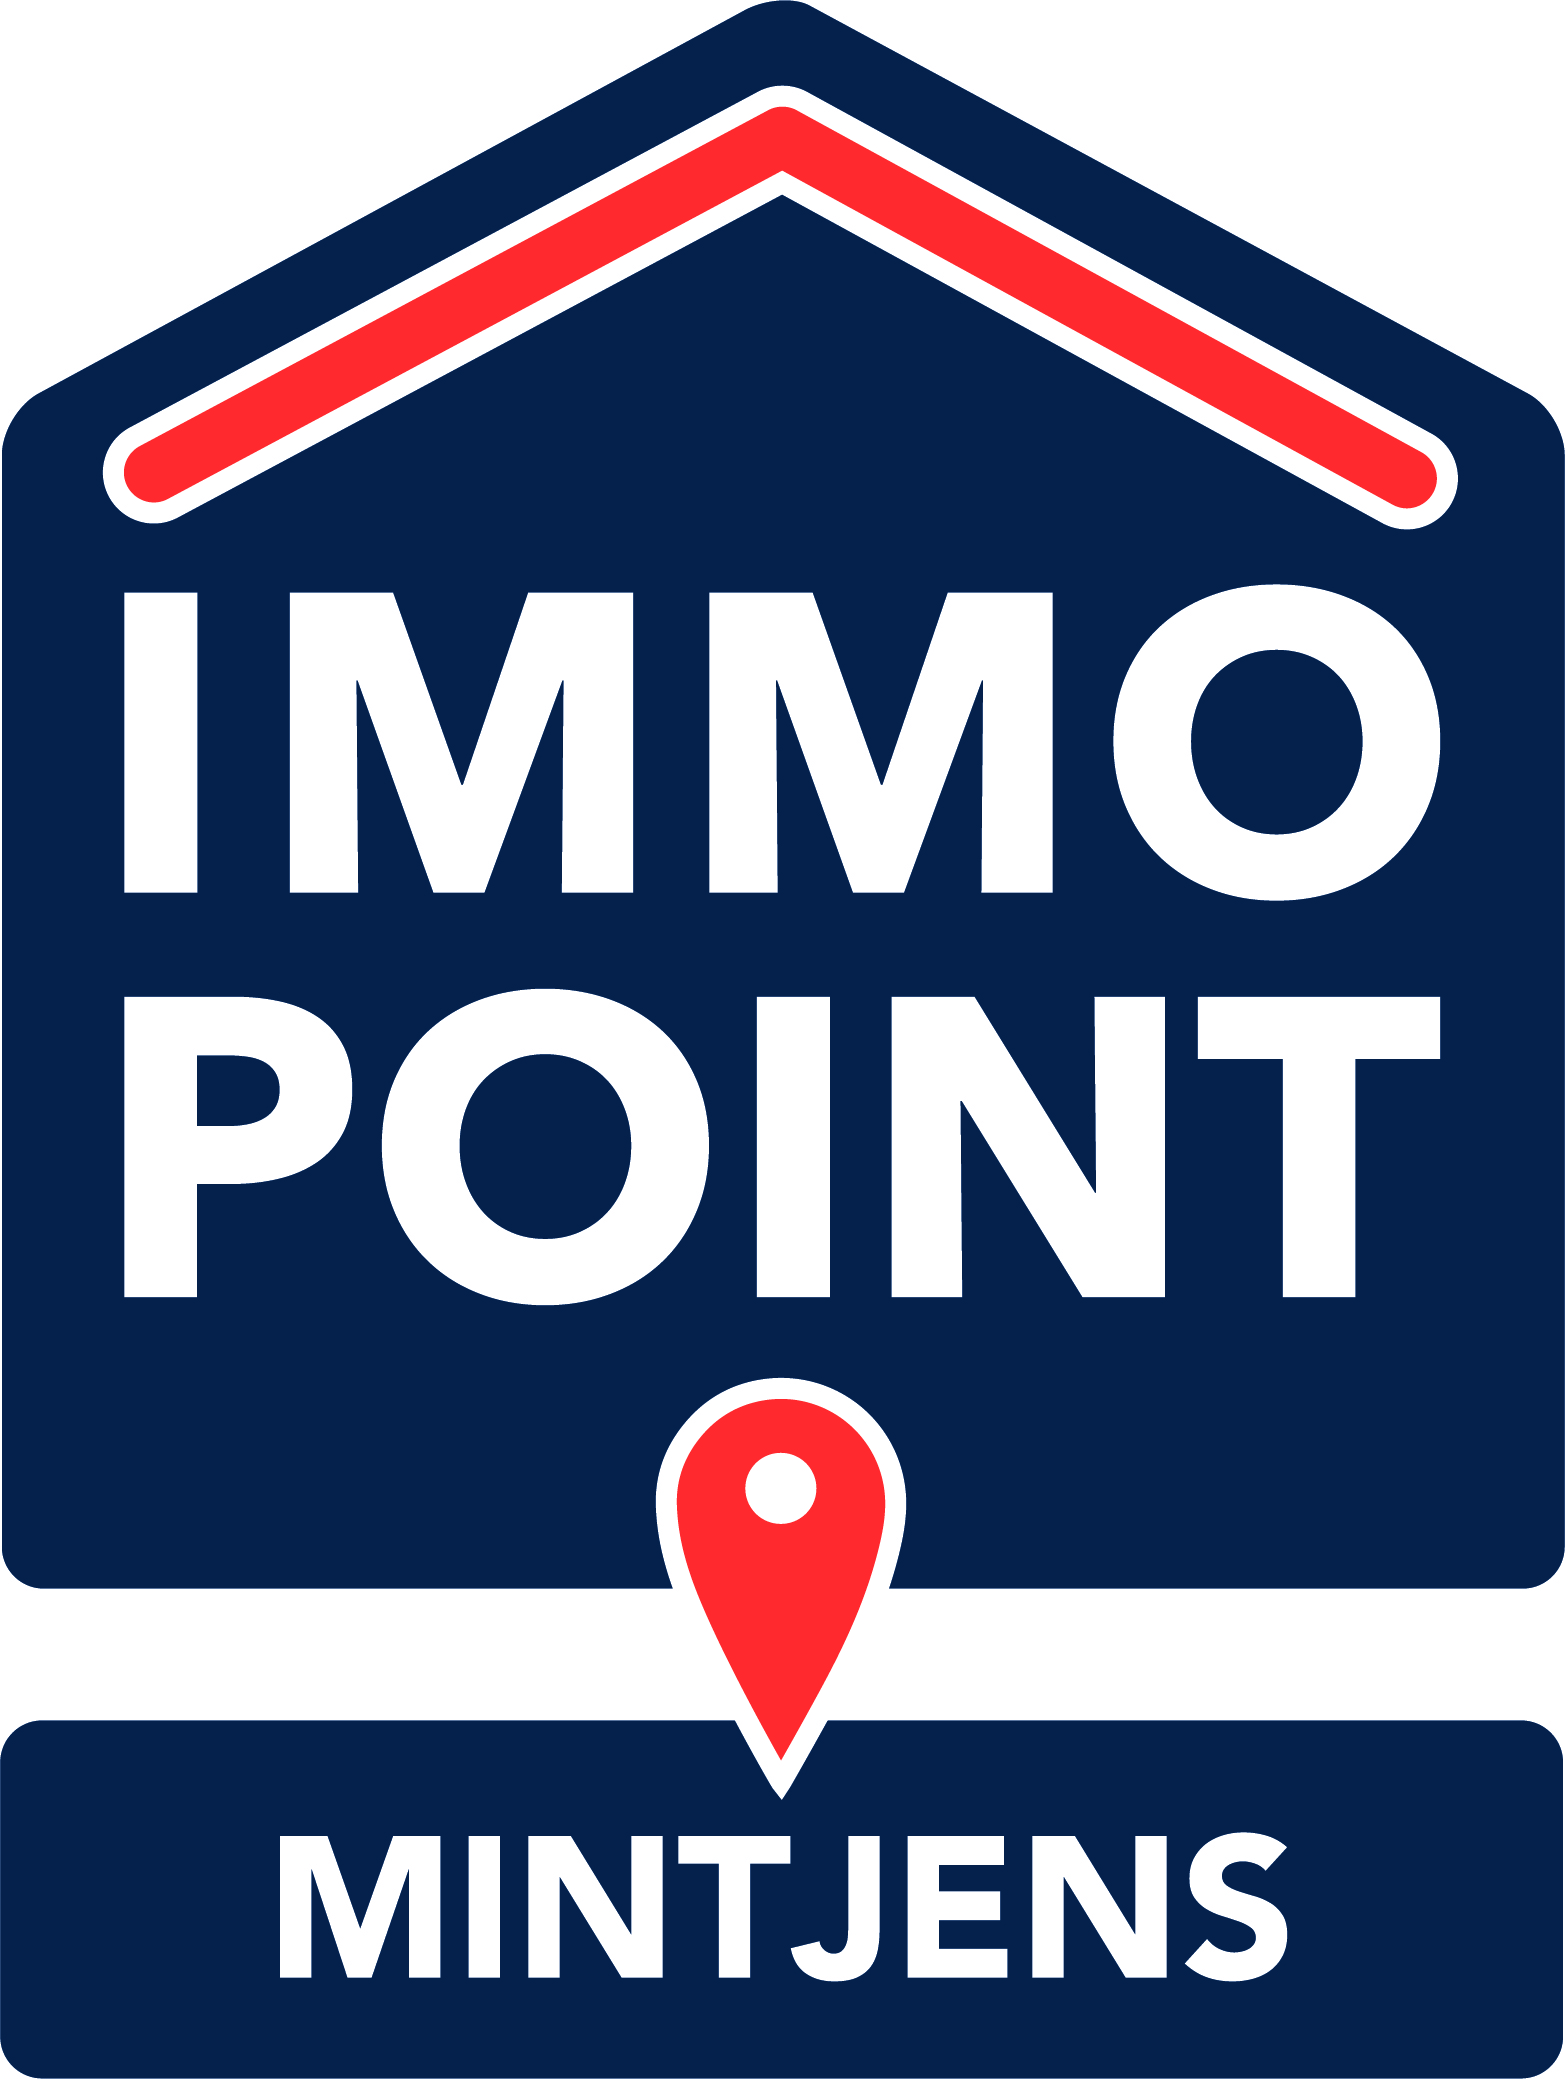 Immo Point Mintjens